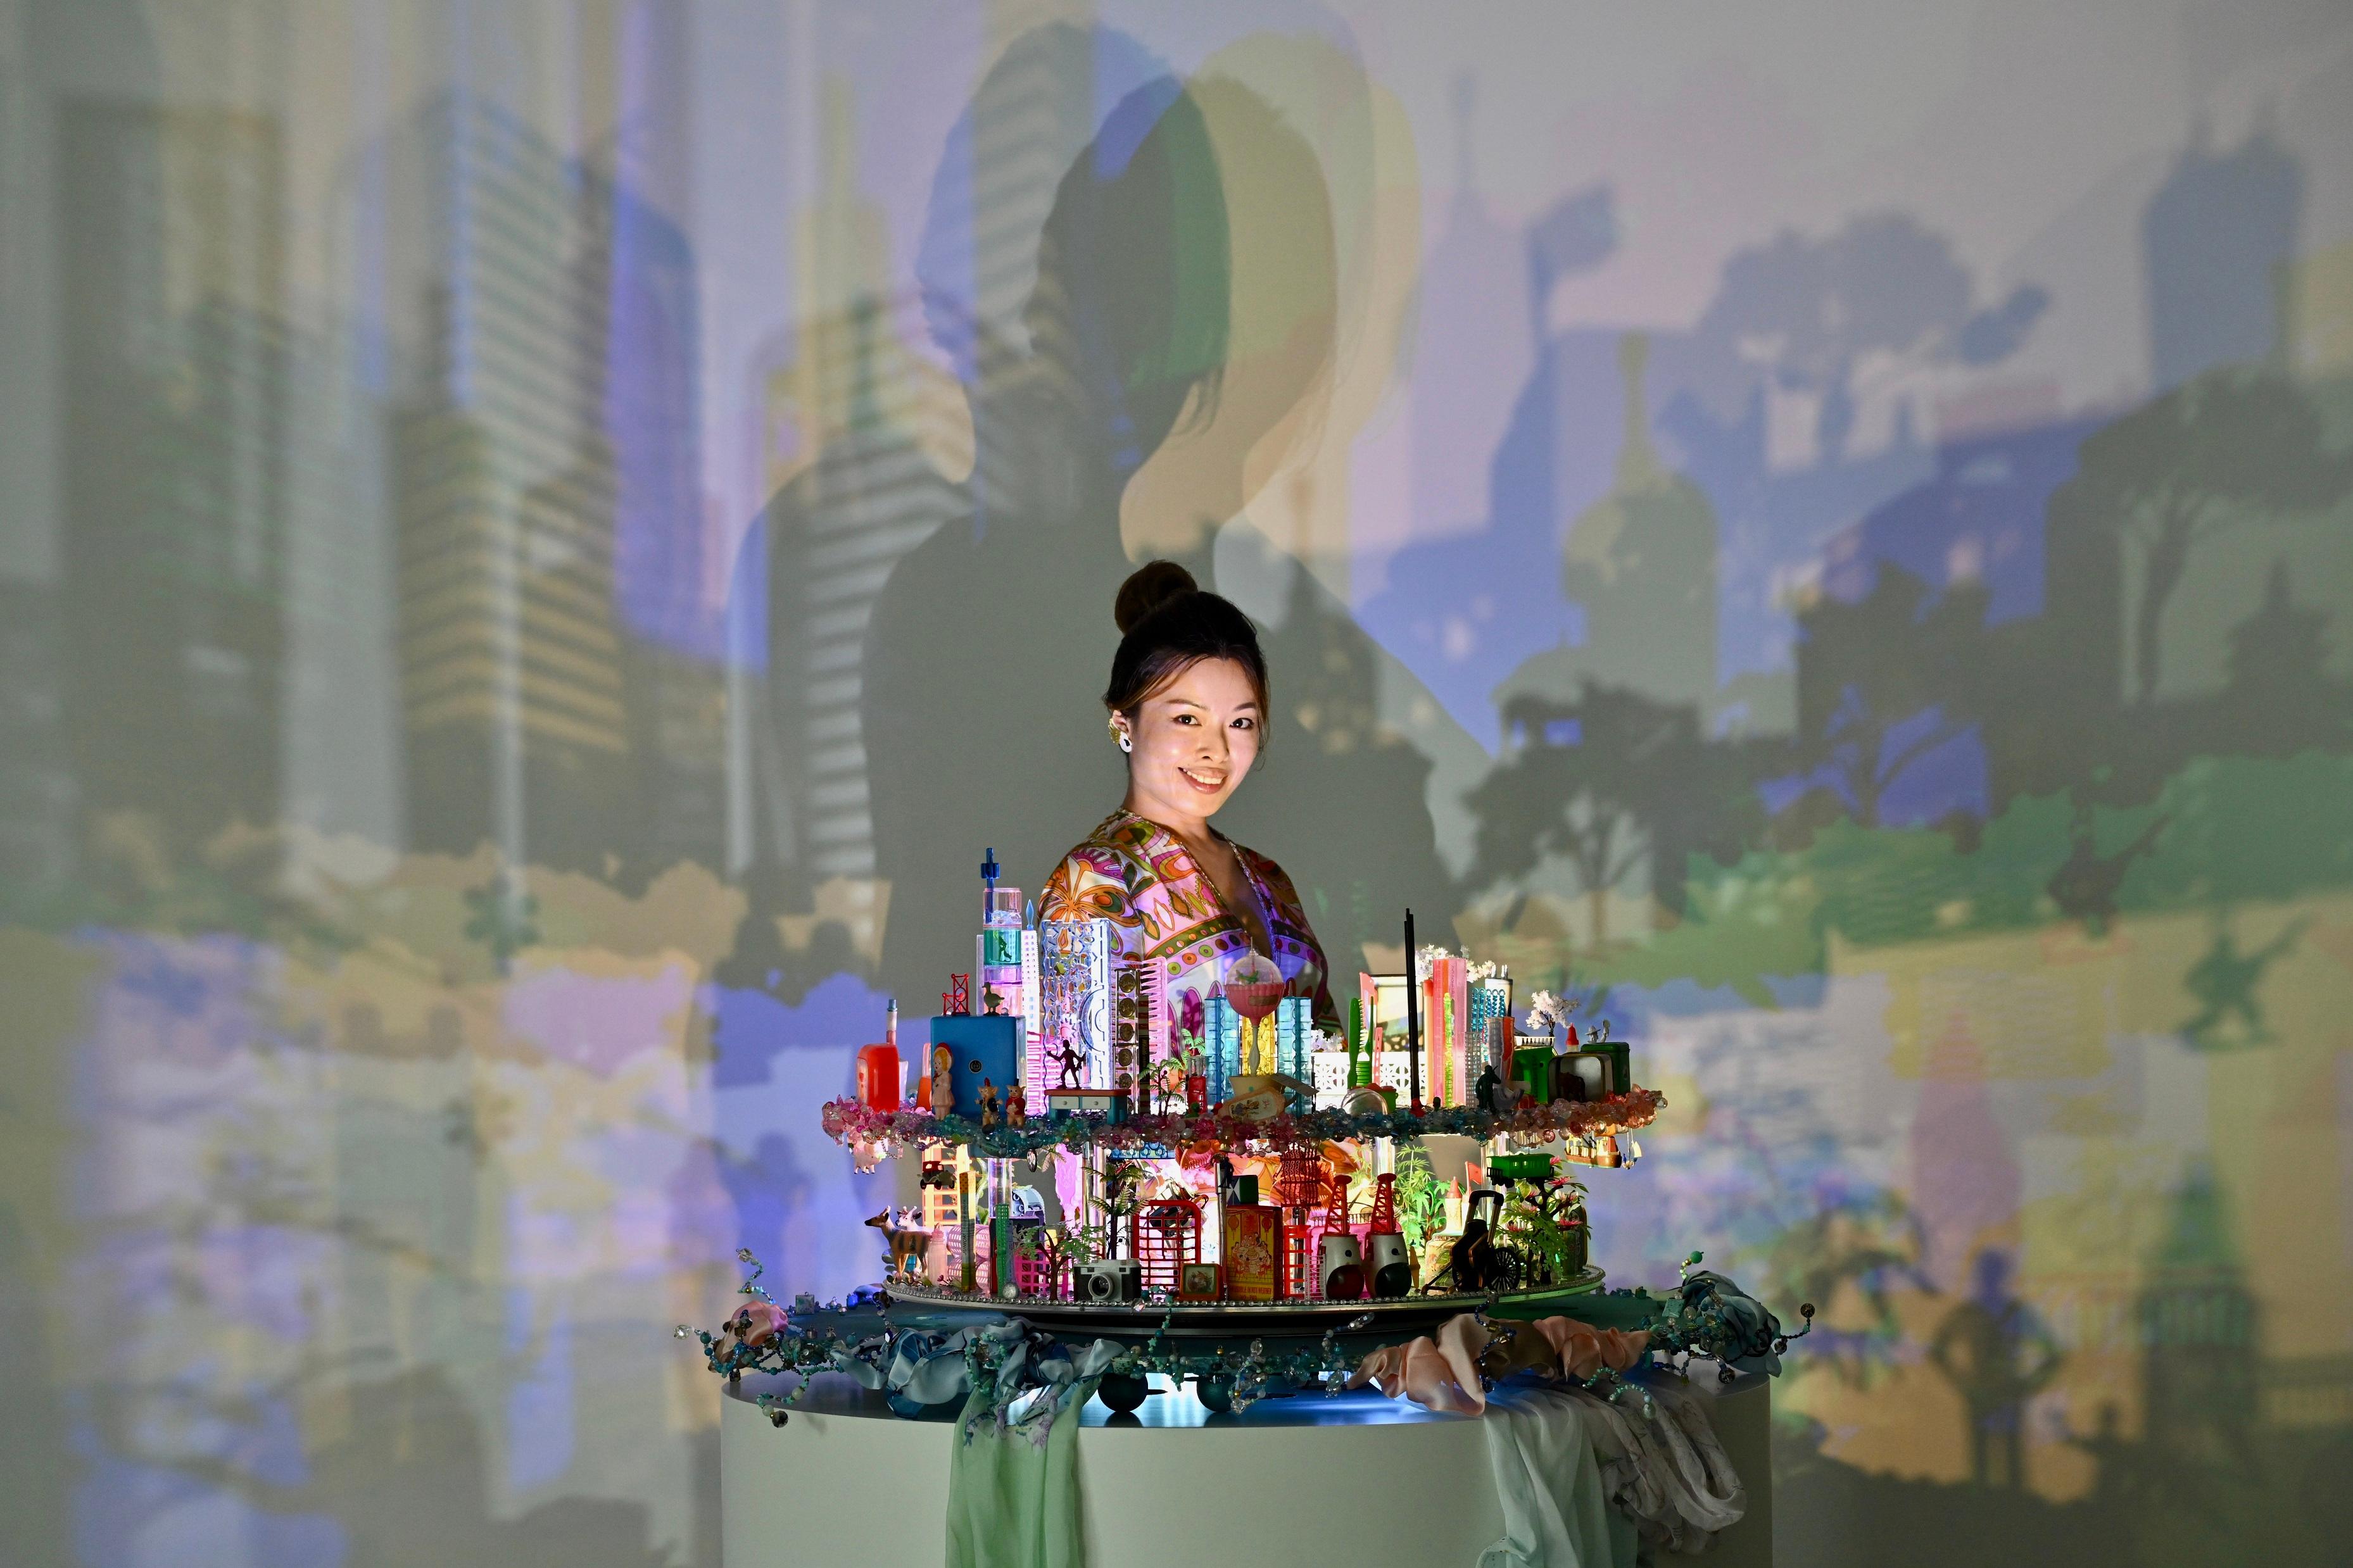 "Art Personalised: Masterpieces from the Hong Kong Museum of Art" exhibition will be held at the Hong Kong Museum of Art from tomorrow (June 30). Picture shows  artist Angela Yuen and her site-specific art installation, "Land Ho!".